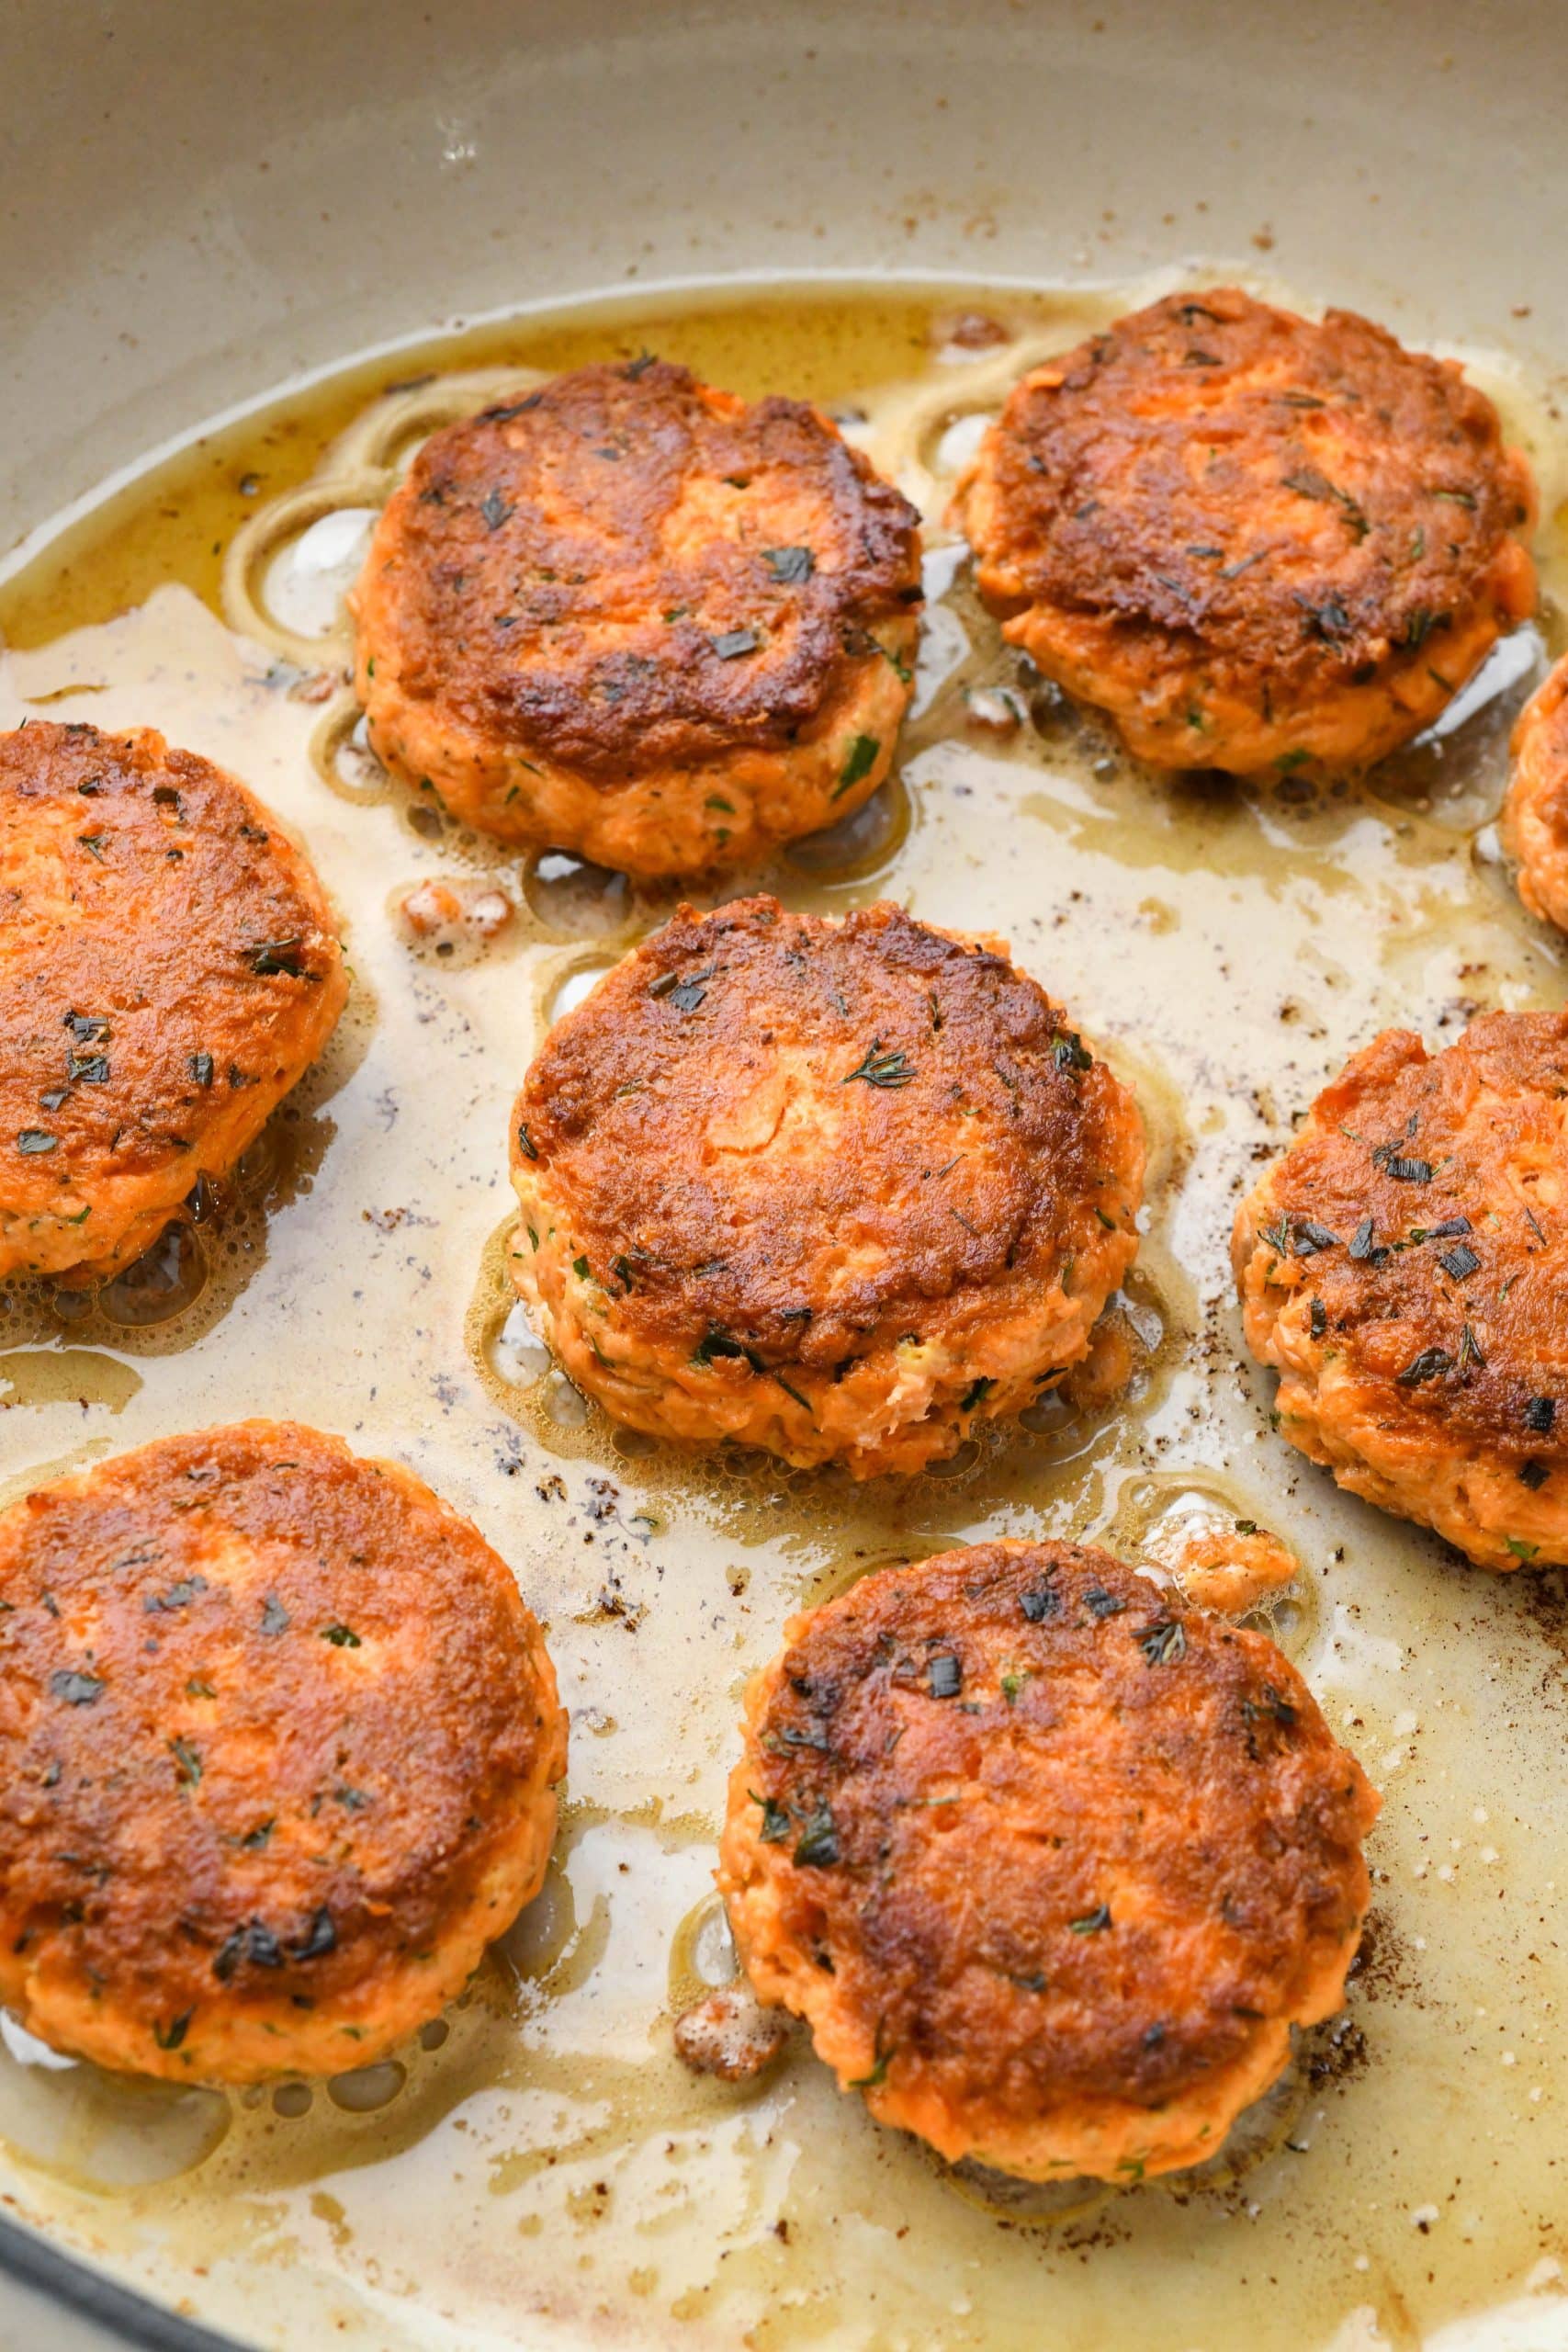 How to make Whole30 Salmon Cakes: Patties cooking in a large white skillet.